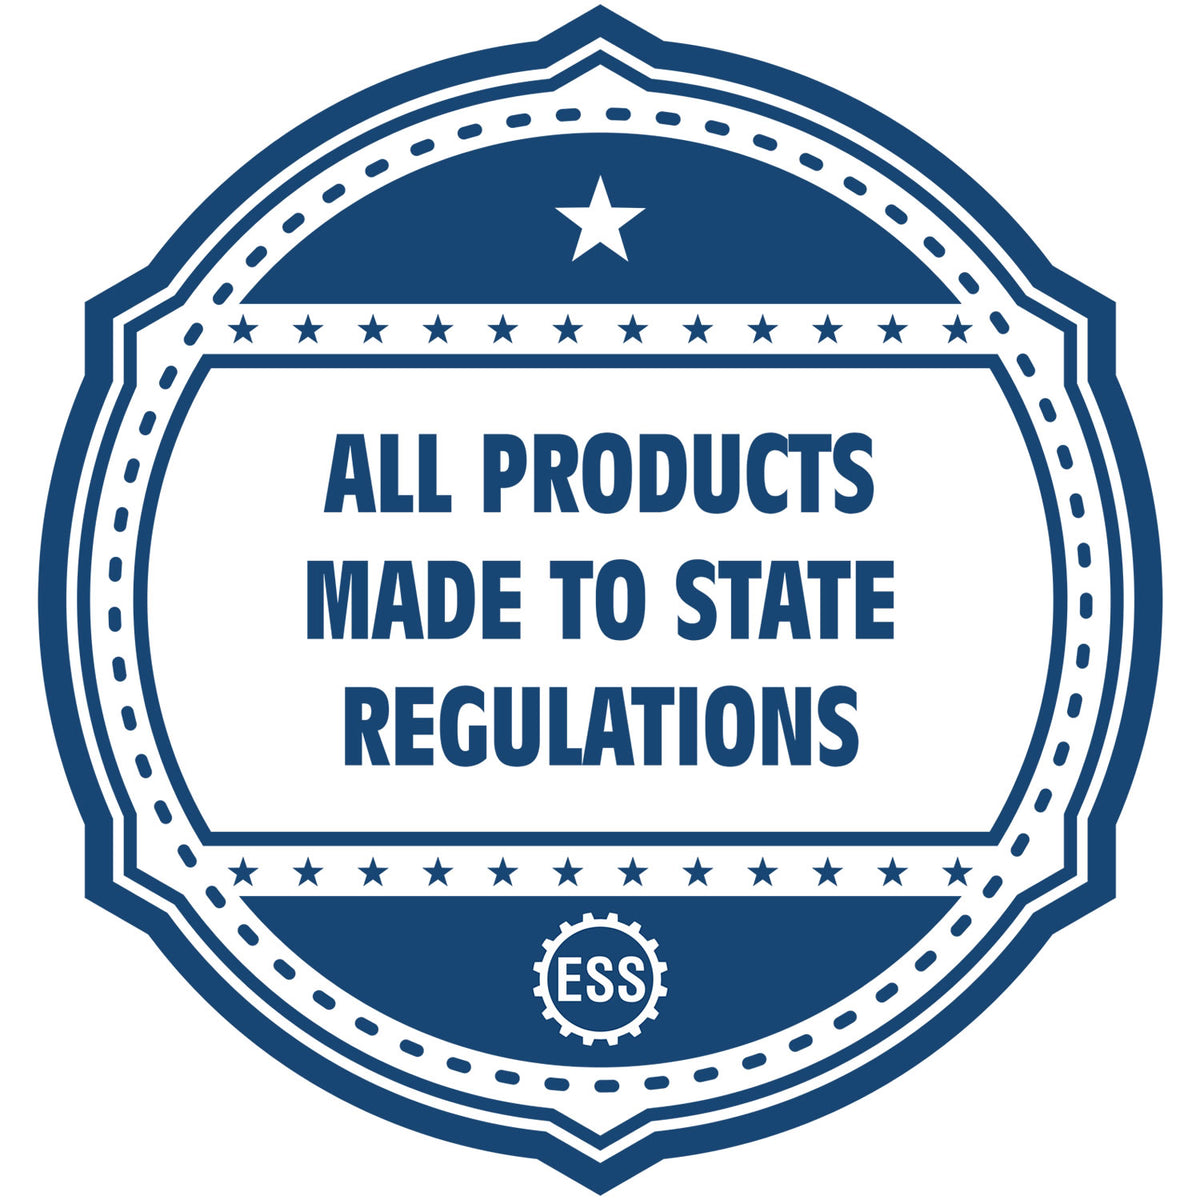 An icon or badge element for the Heavy-Duty Missouri Rectangular Notary Stamp showing that this product is made in compliance with state regulations.